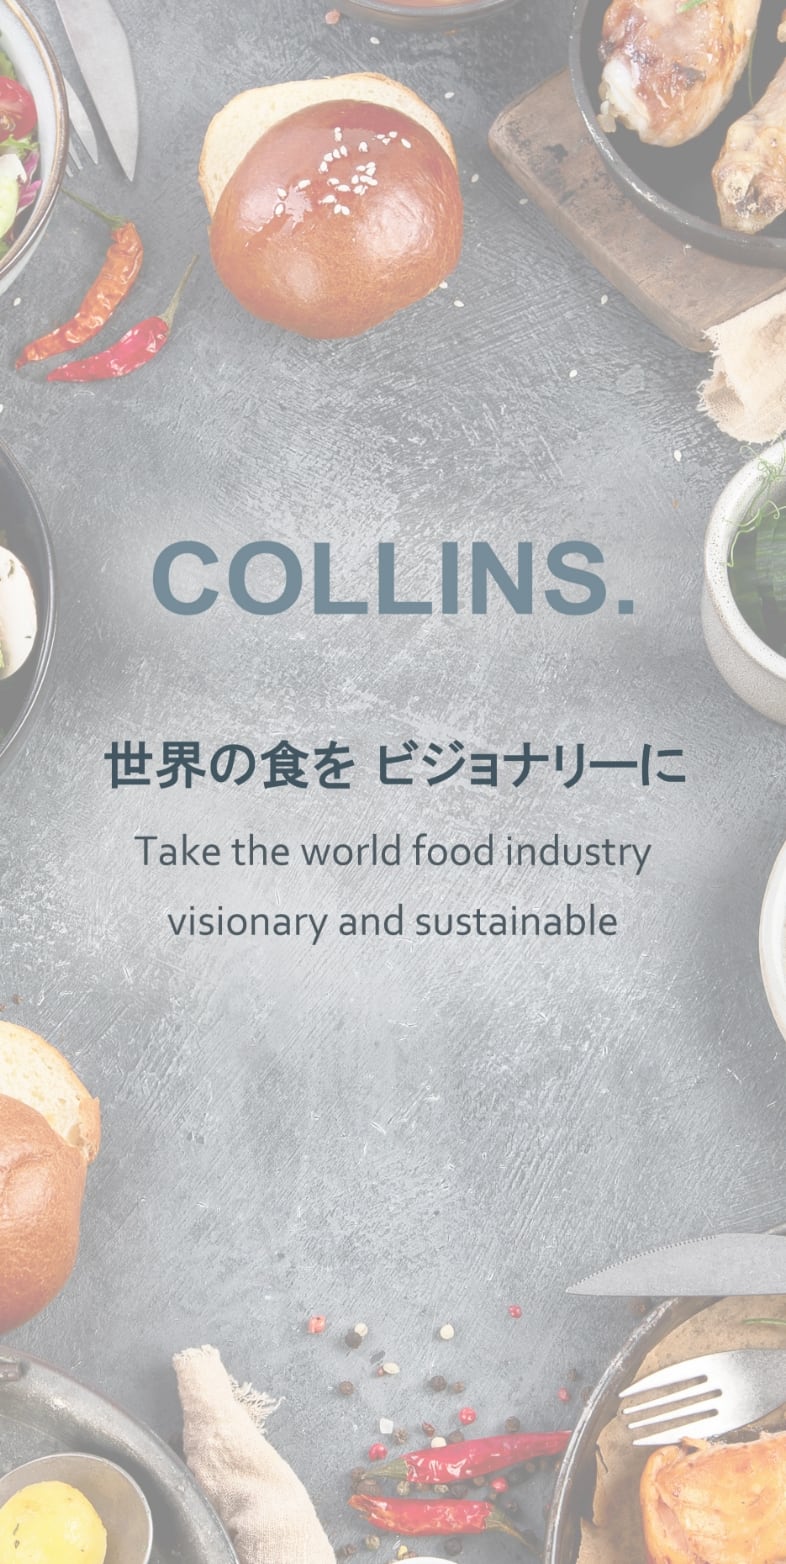 COLLINS. 世界の食をビジョナリーに take the world food industry visinary and sustainable